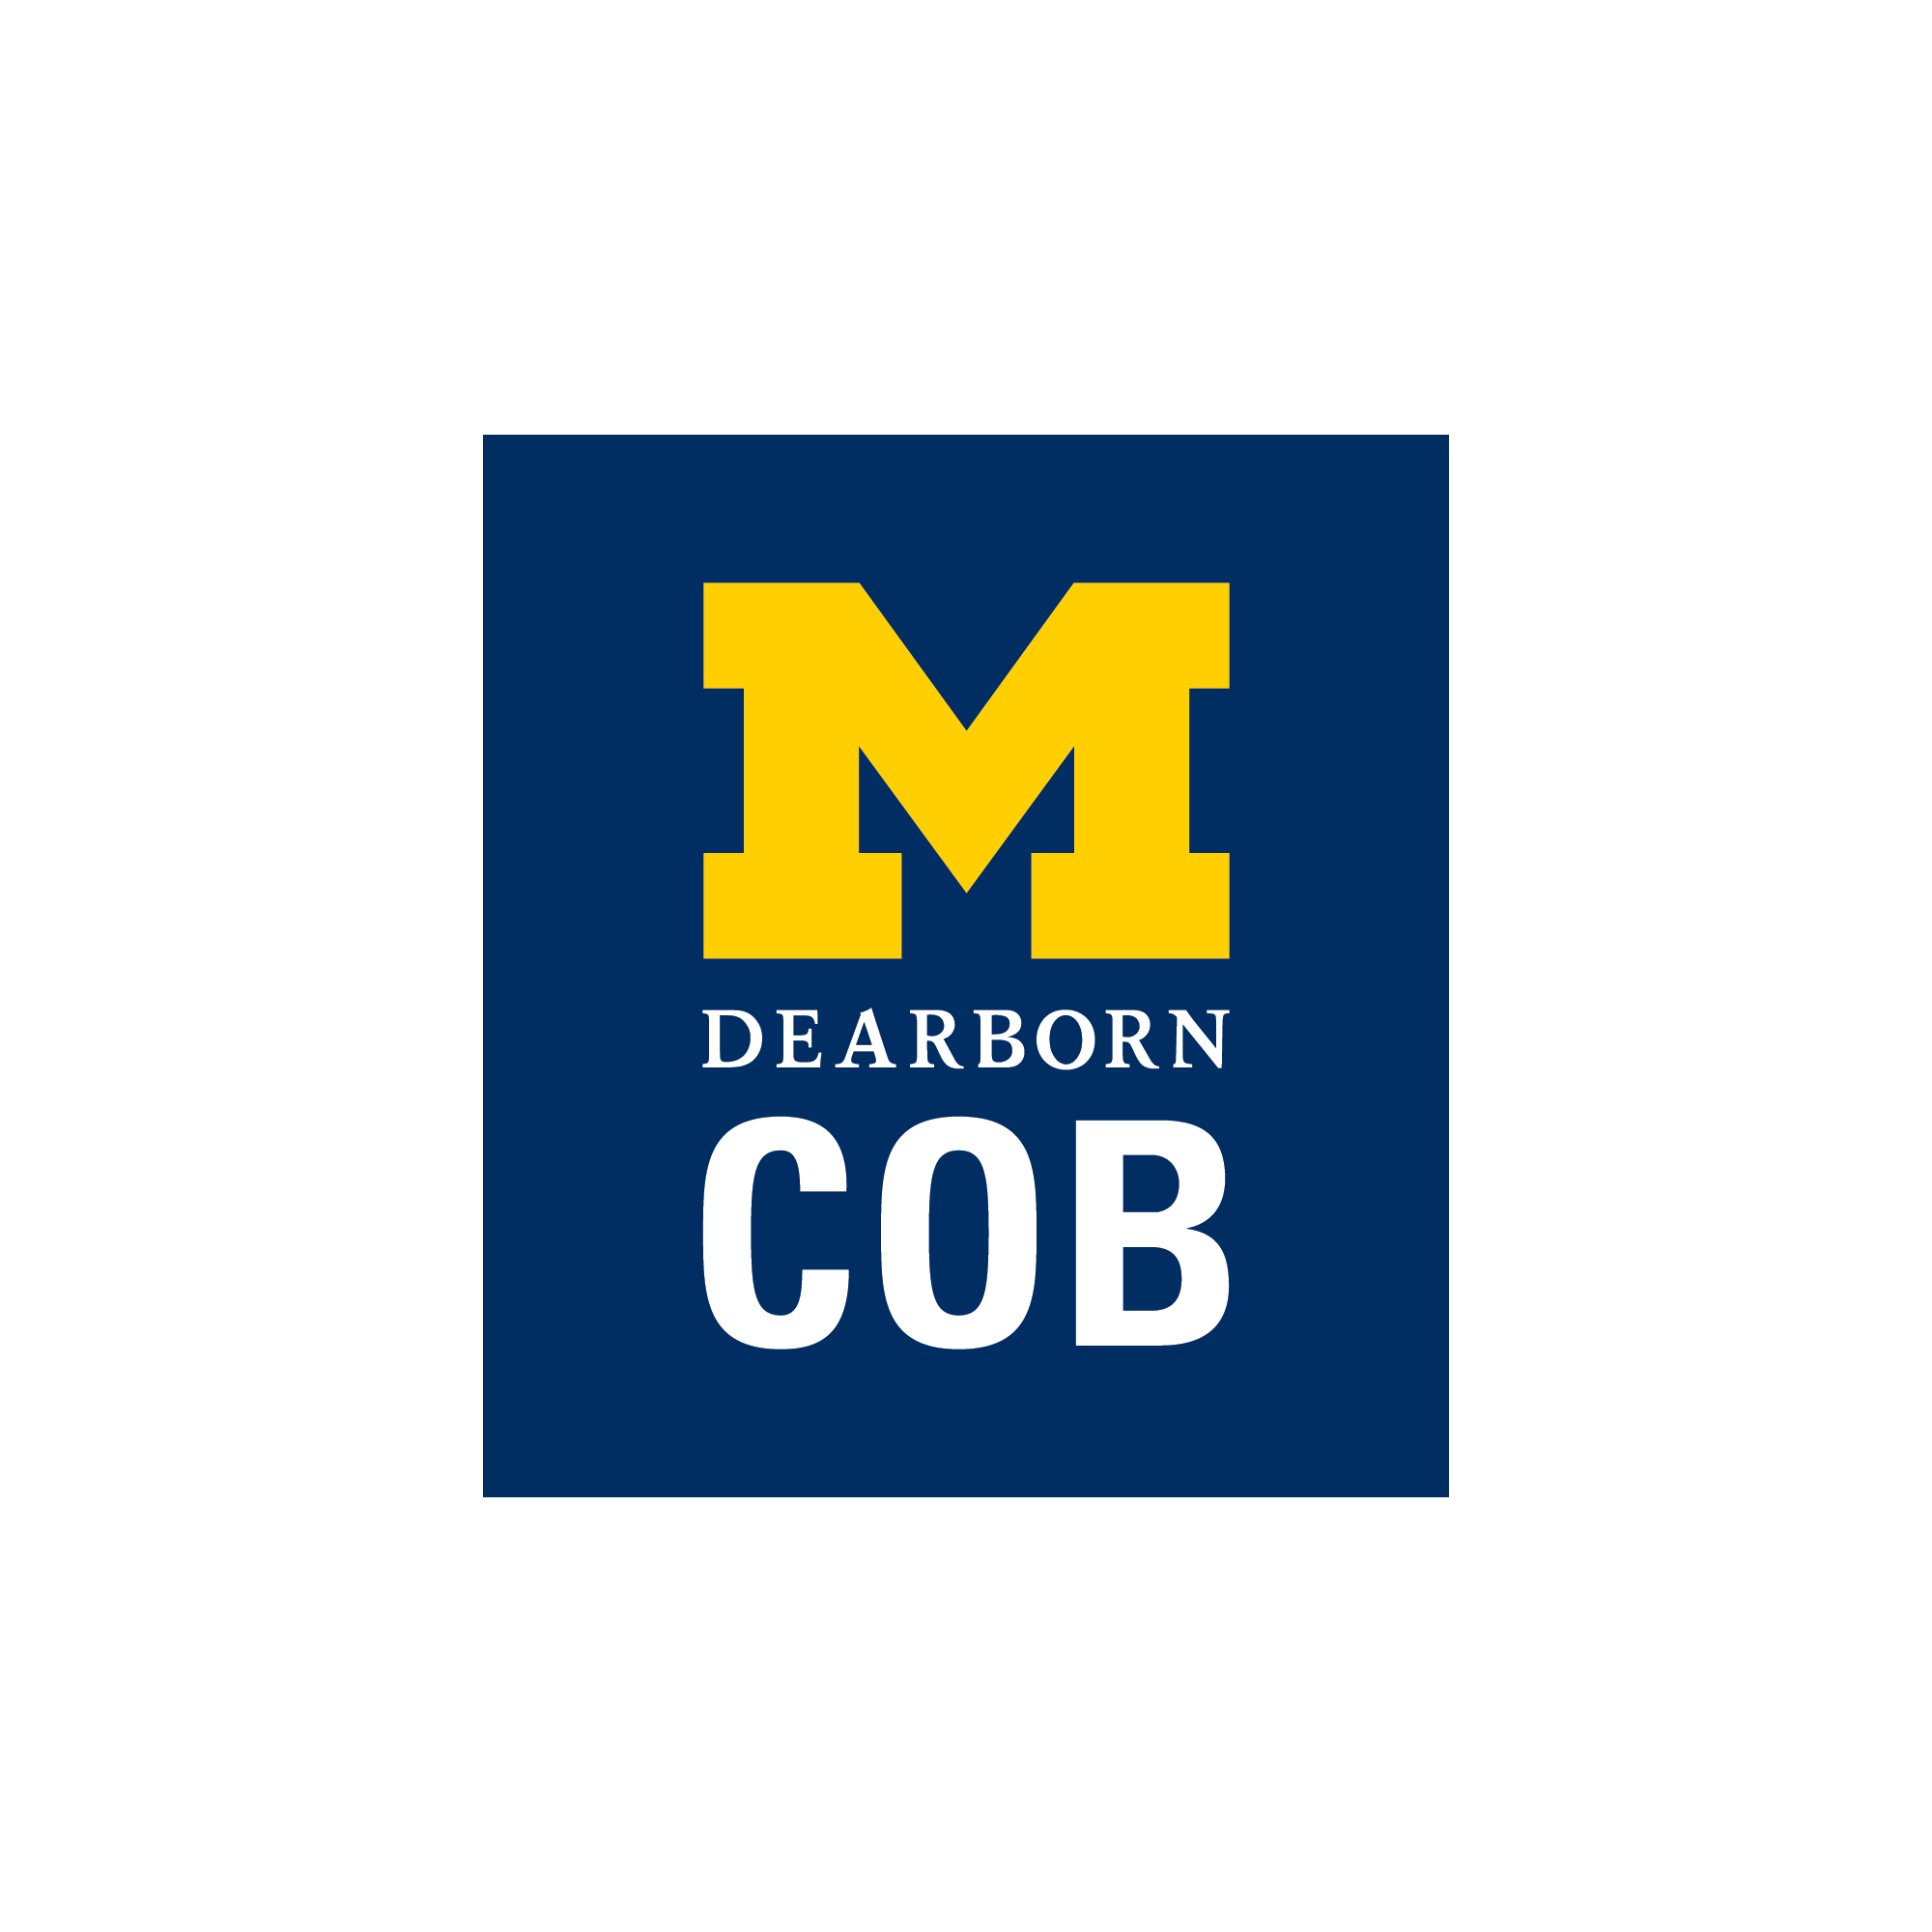 A maize yellow varsity-style letter M on a navy blue background. Underneath the M is "Dearborn" and "COB" in all capital, white lettering.